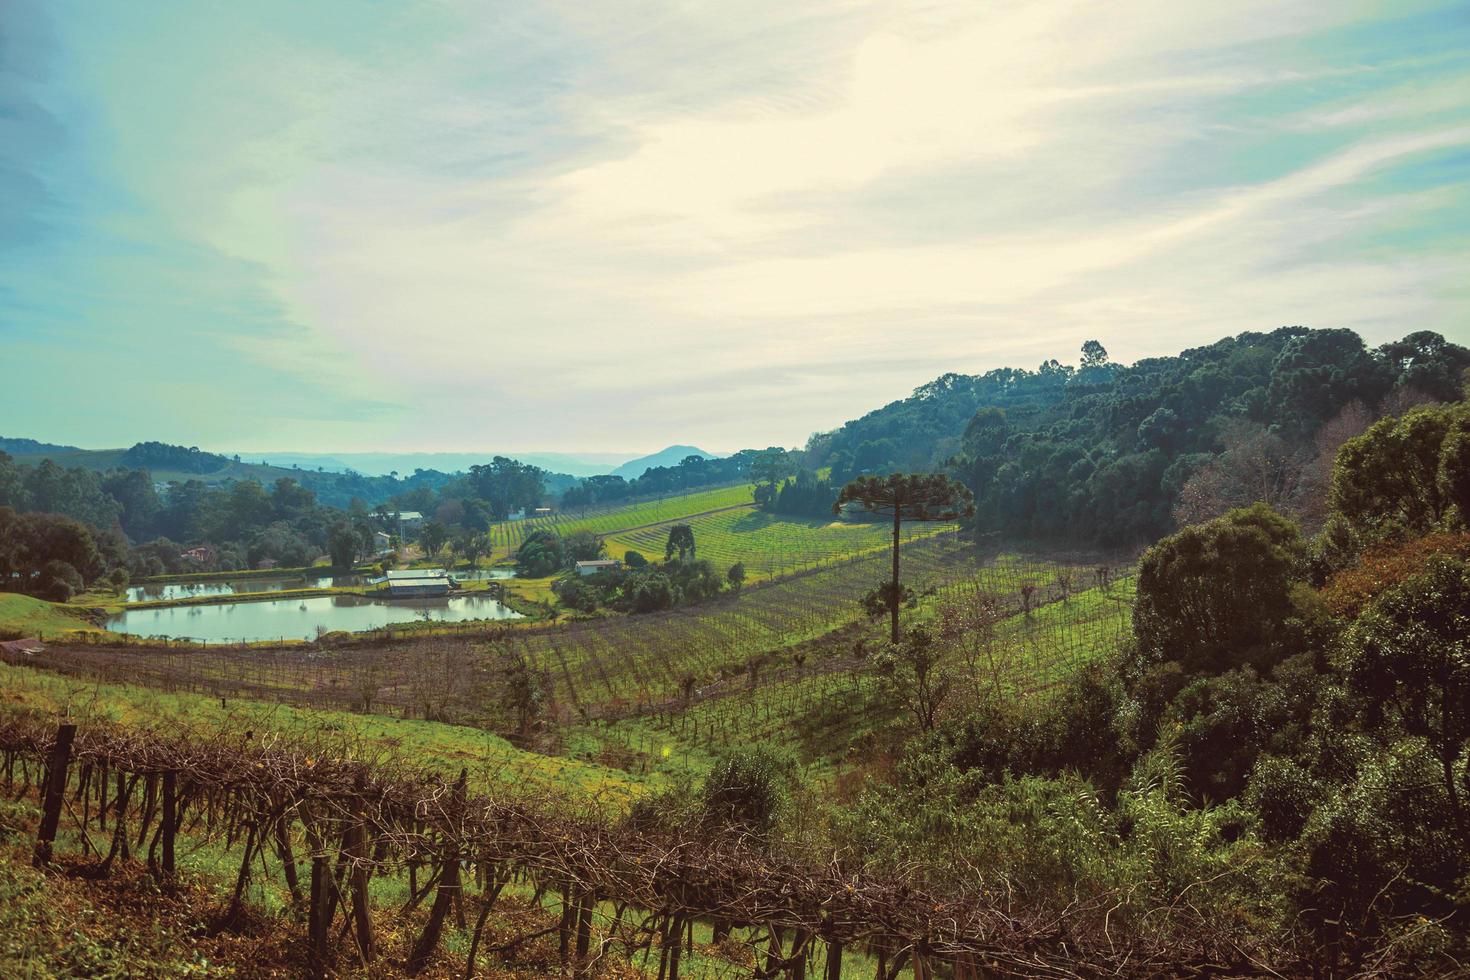 Bucolic rural landscape with vineyards going up the hill and woods in a cloudy day near Bento Goncalves. A friendly country town in southern Brazil famous for its wine production. Vintage filter. photo